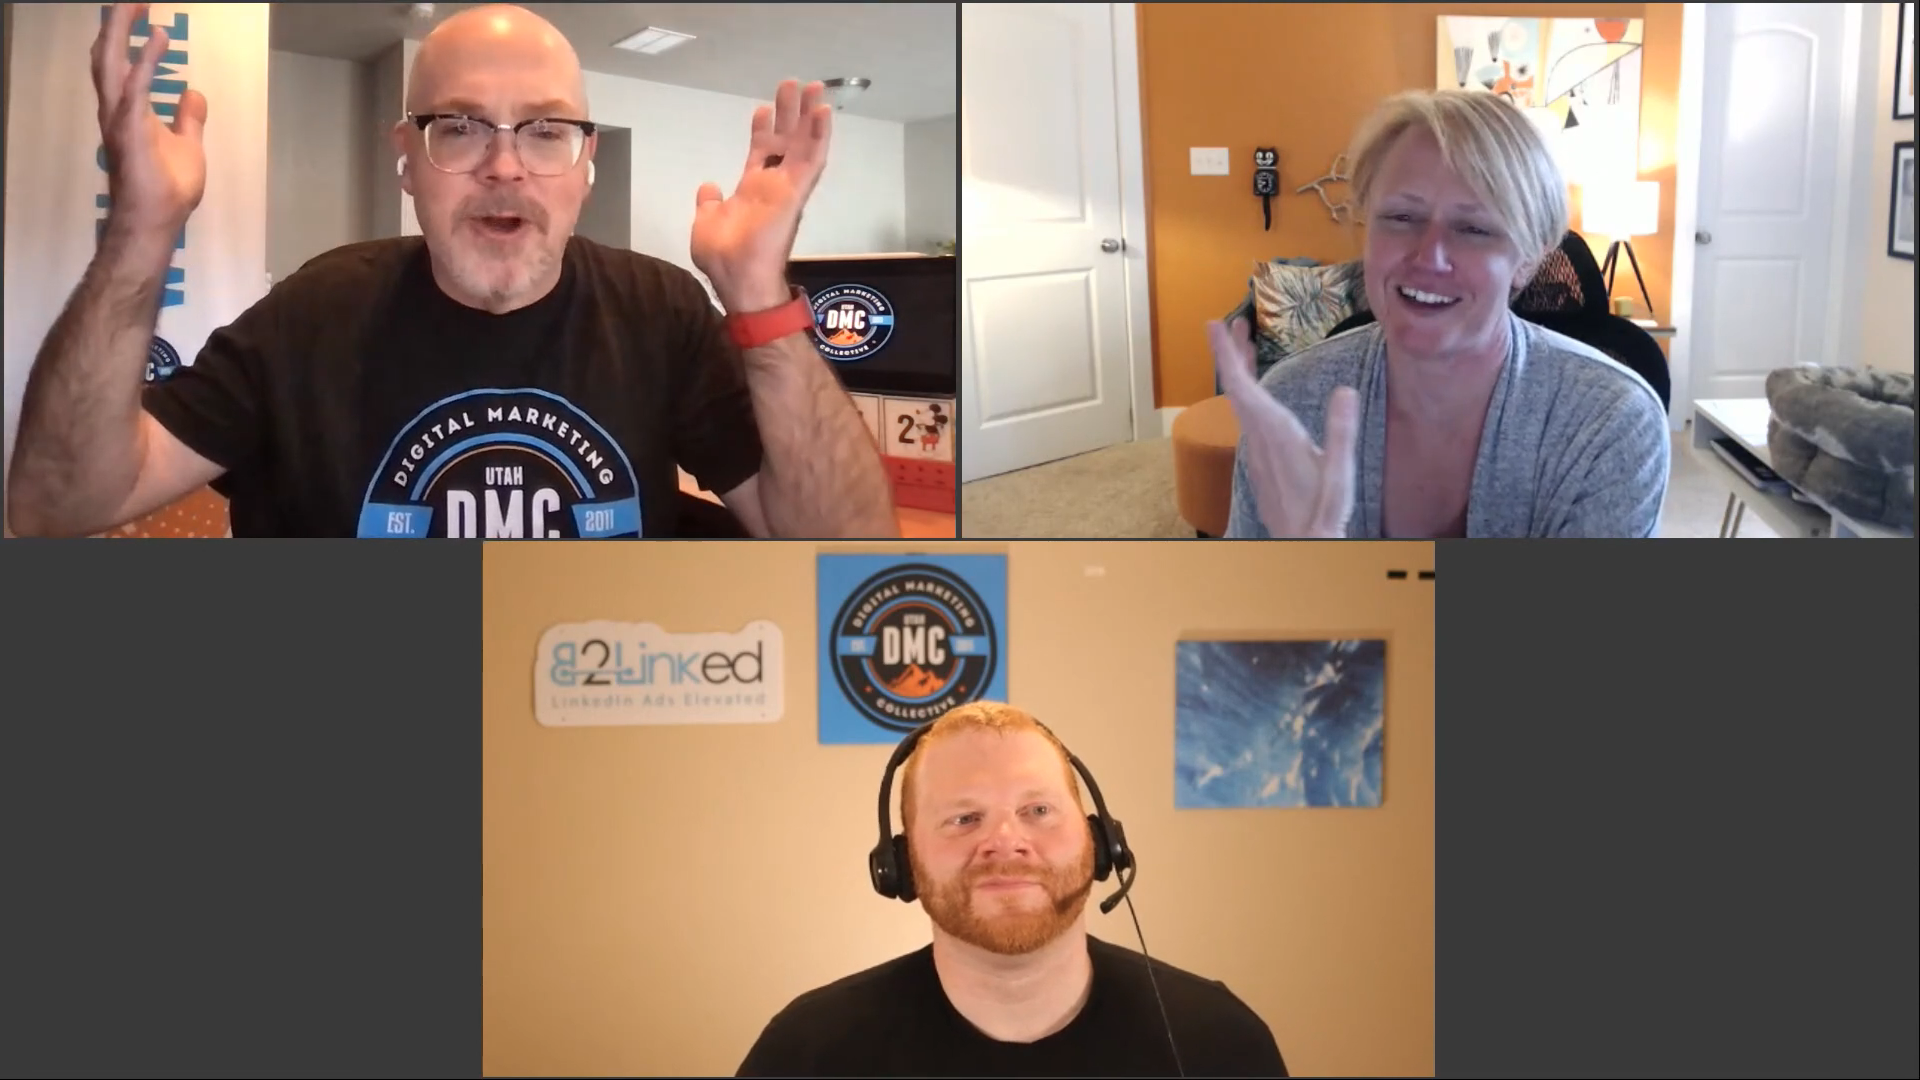 The Tricky & Sometimes Messy World of Digital Agency & Client Relationships with Susan Wenograd - May 12, 2021 [Event Recap + Replay]